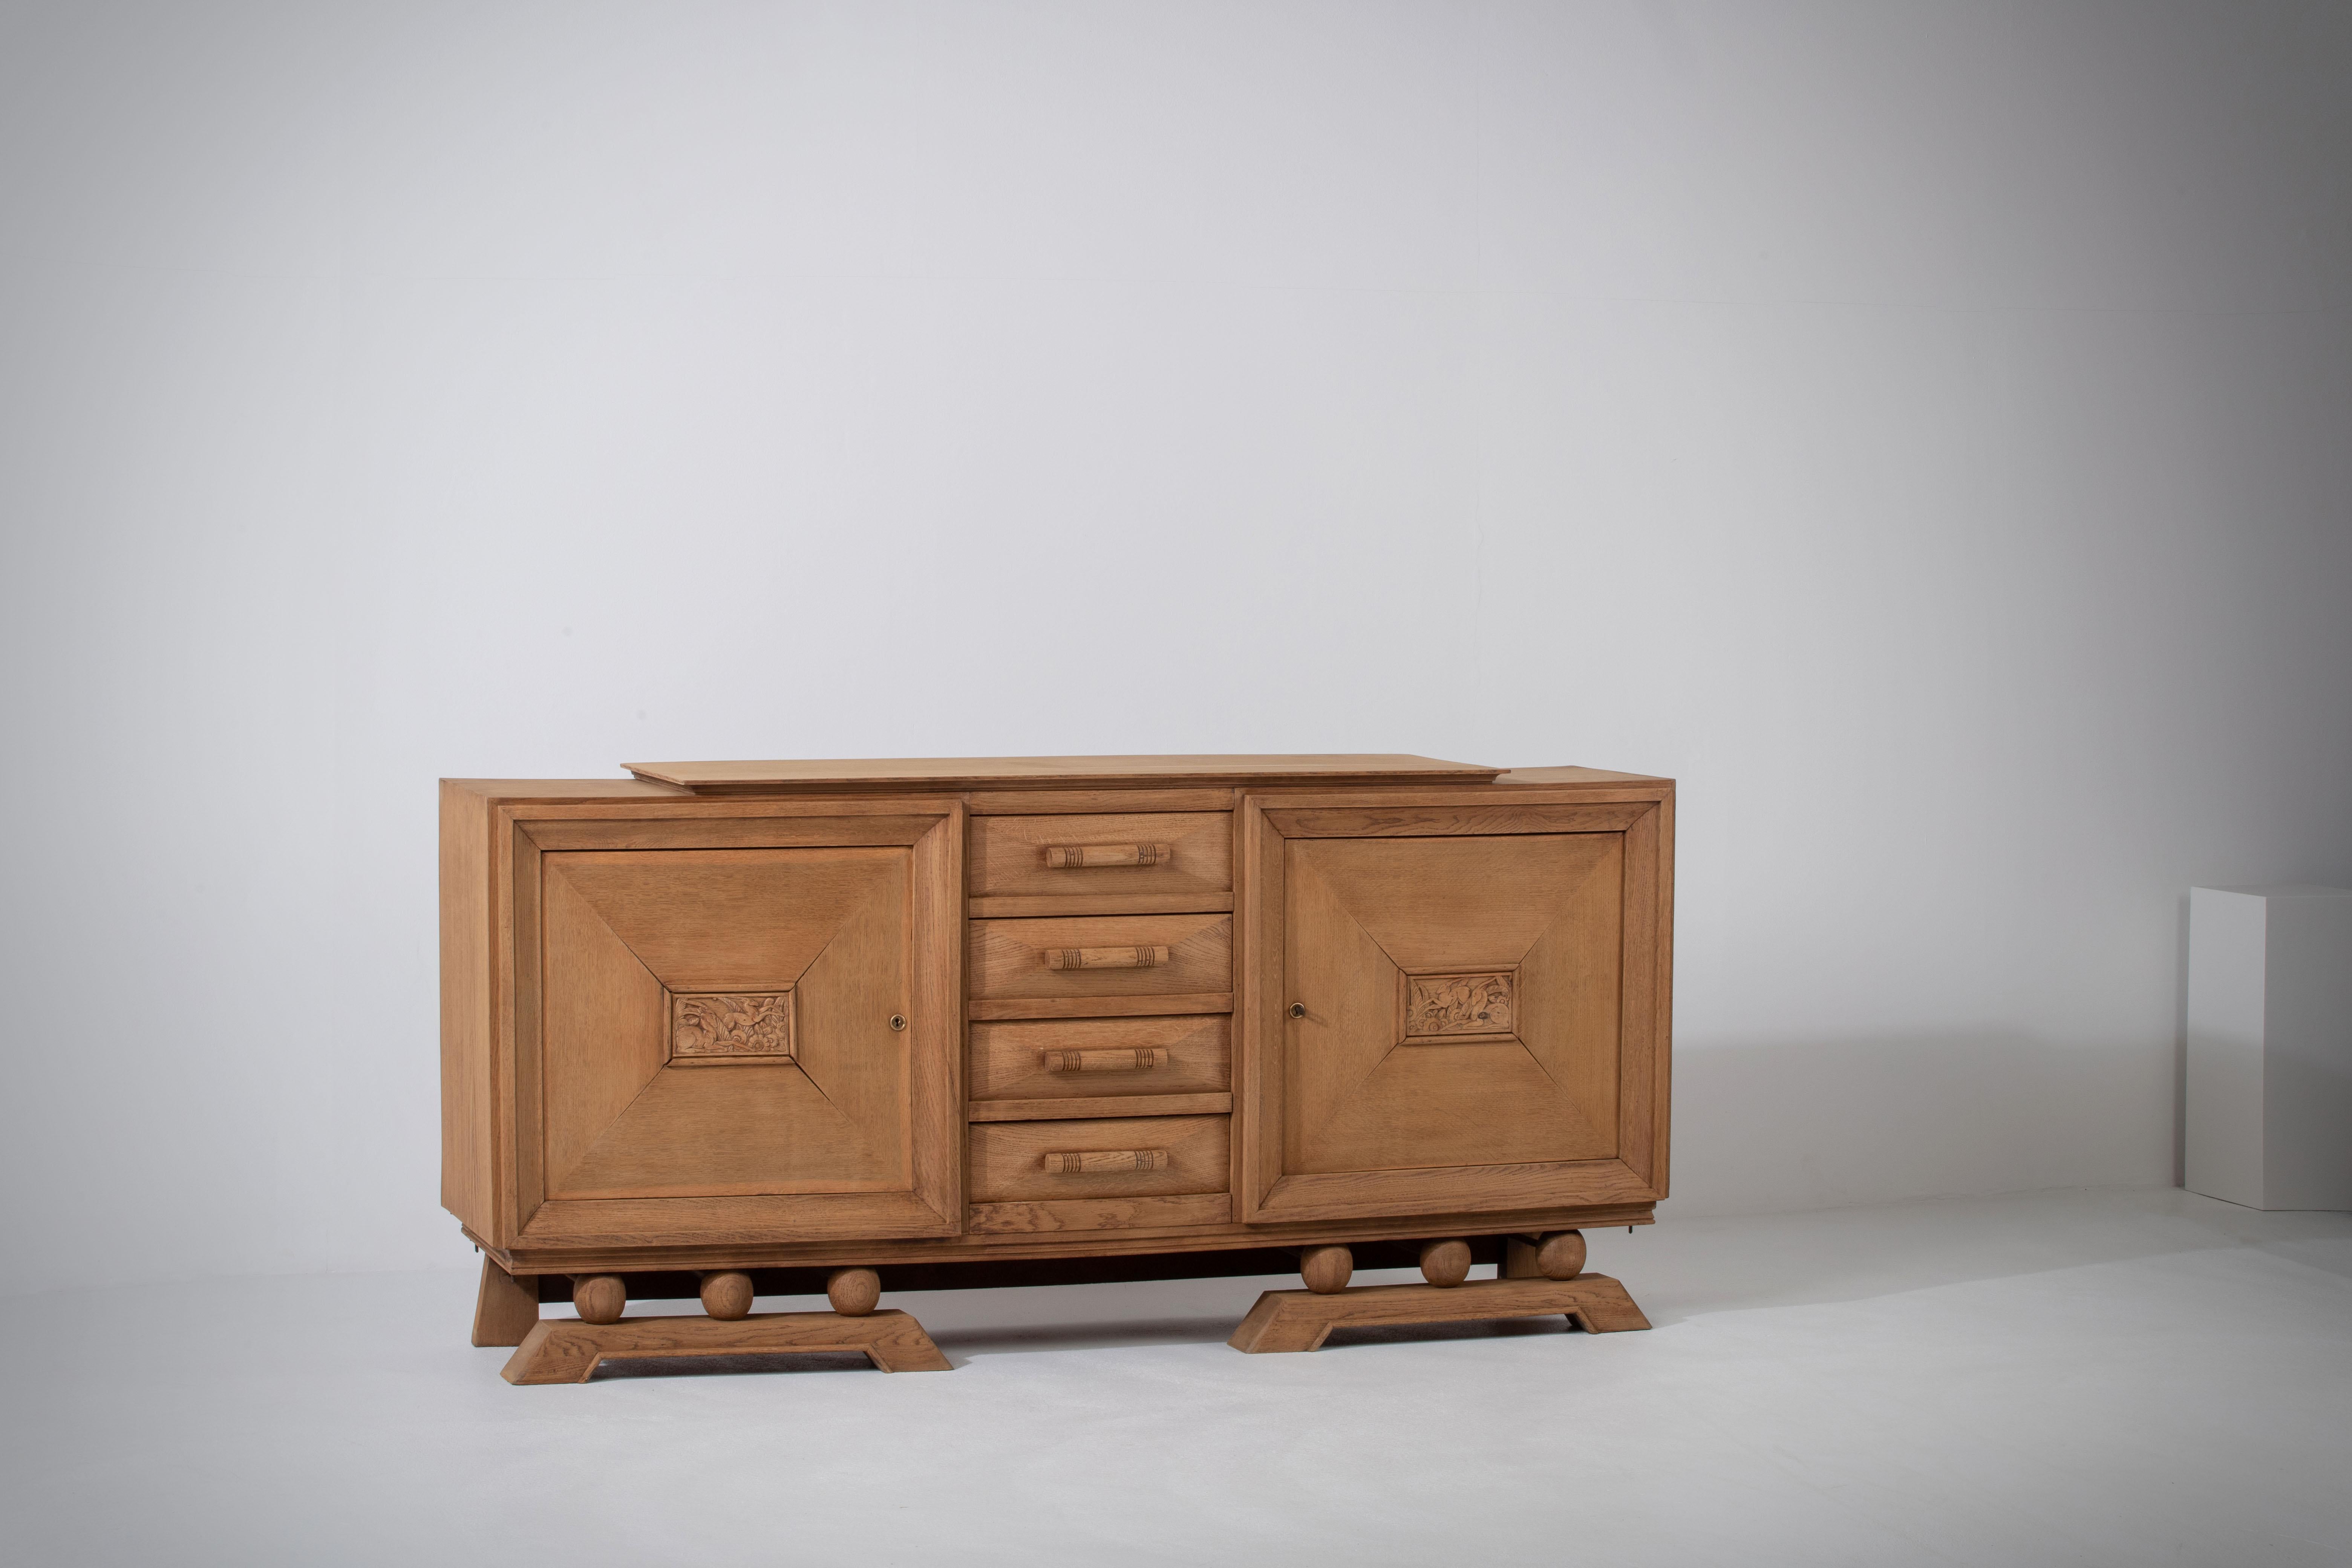 Introducing a stunning 1940s Brutalist sideboard, expertly crafted in France from natural oak. This exceptional piece embodies the captivating fusion of strength and elegance that characterizes the Brutalist style. Its exquisite design features